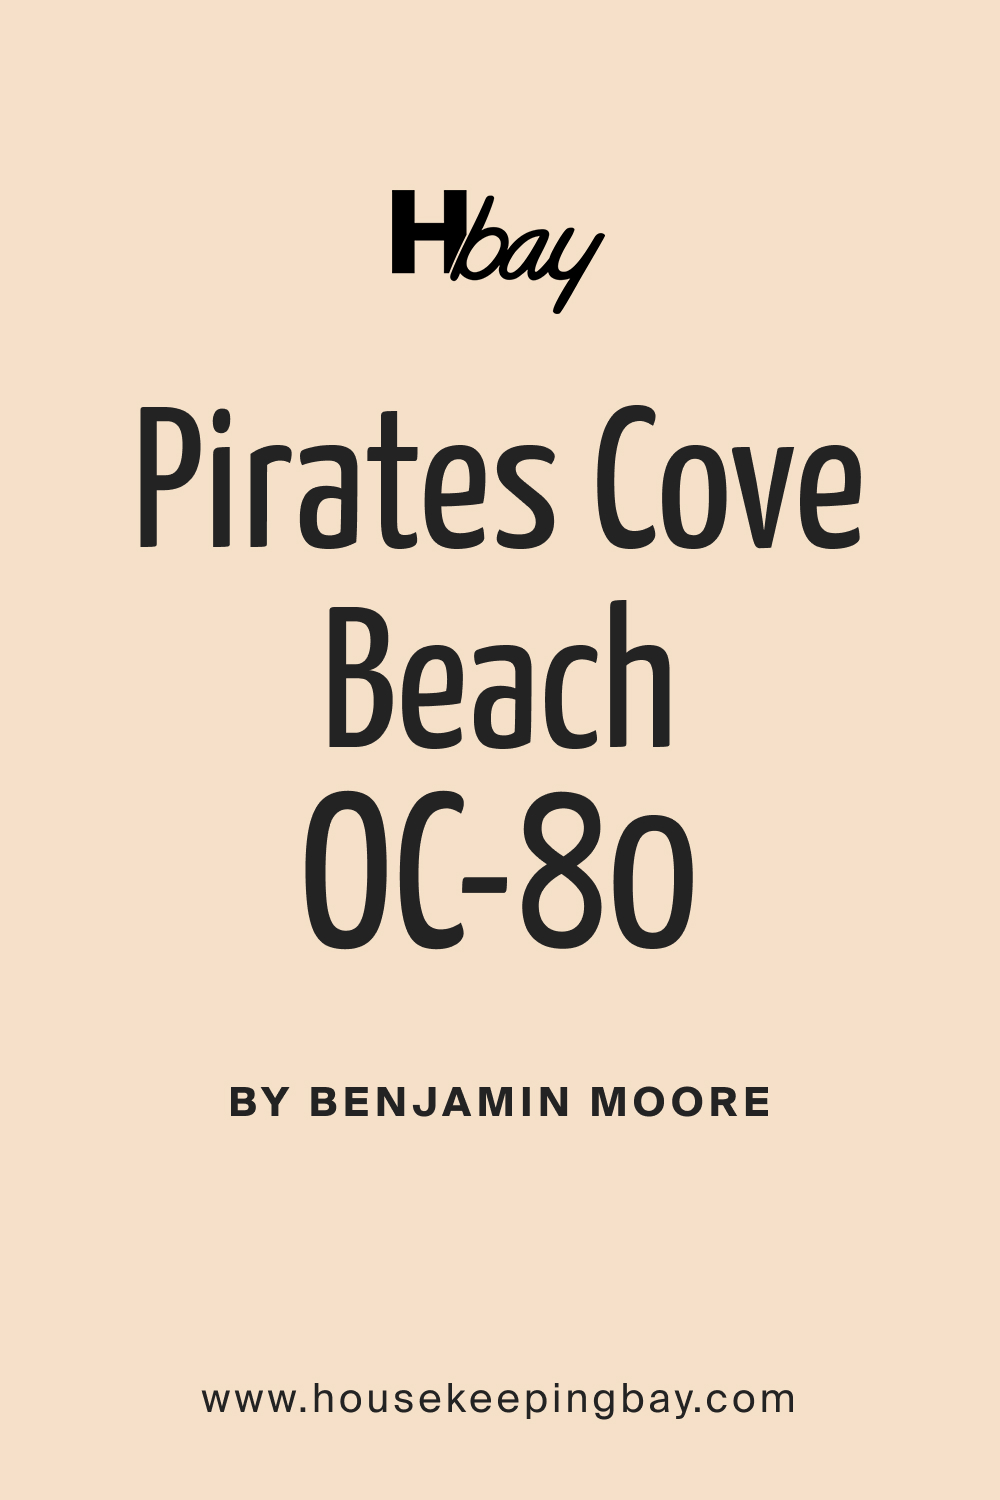 Pirates Cove Beach OC 80 Paint Color by Benjamin Moore